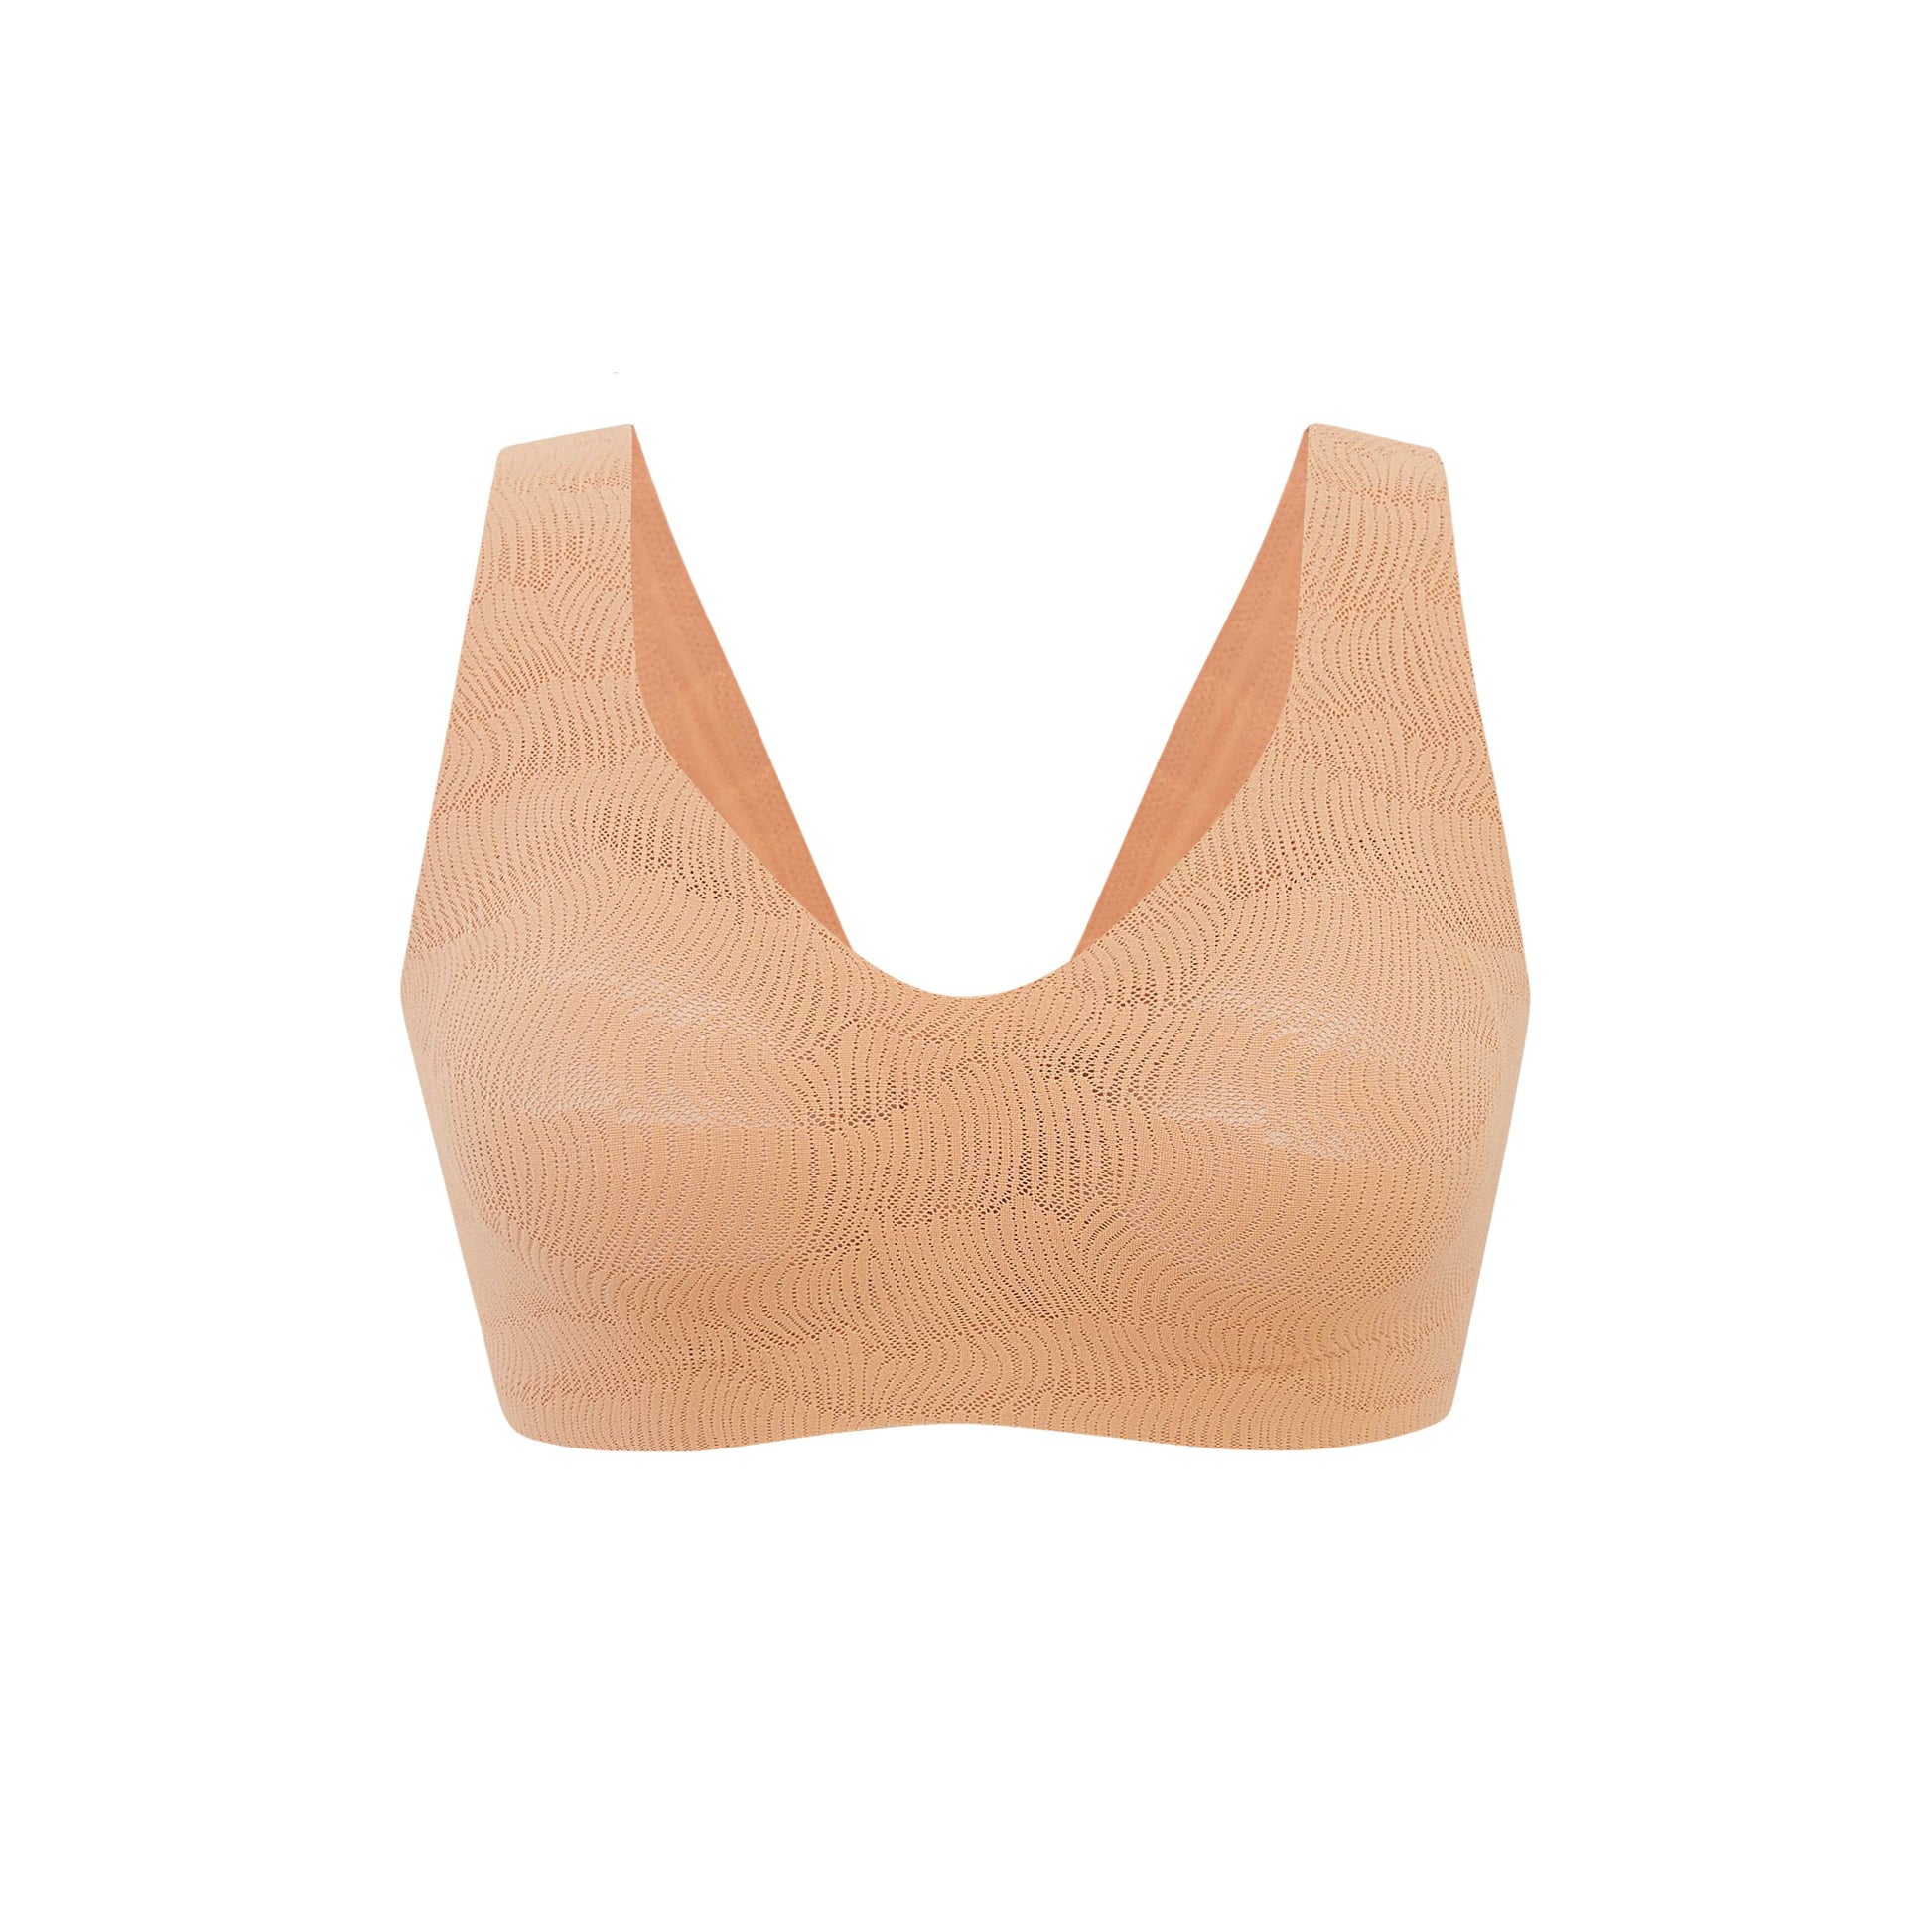 These 'Cloud-Like' Neiwai Wireless Bras Are on Sale with This Promo Code